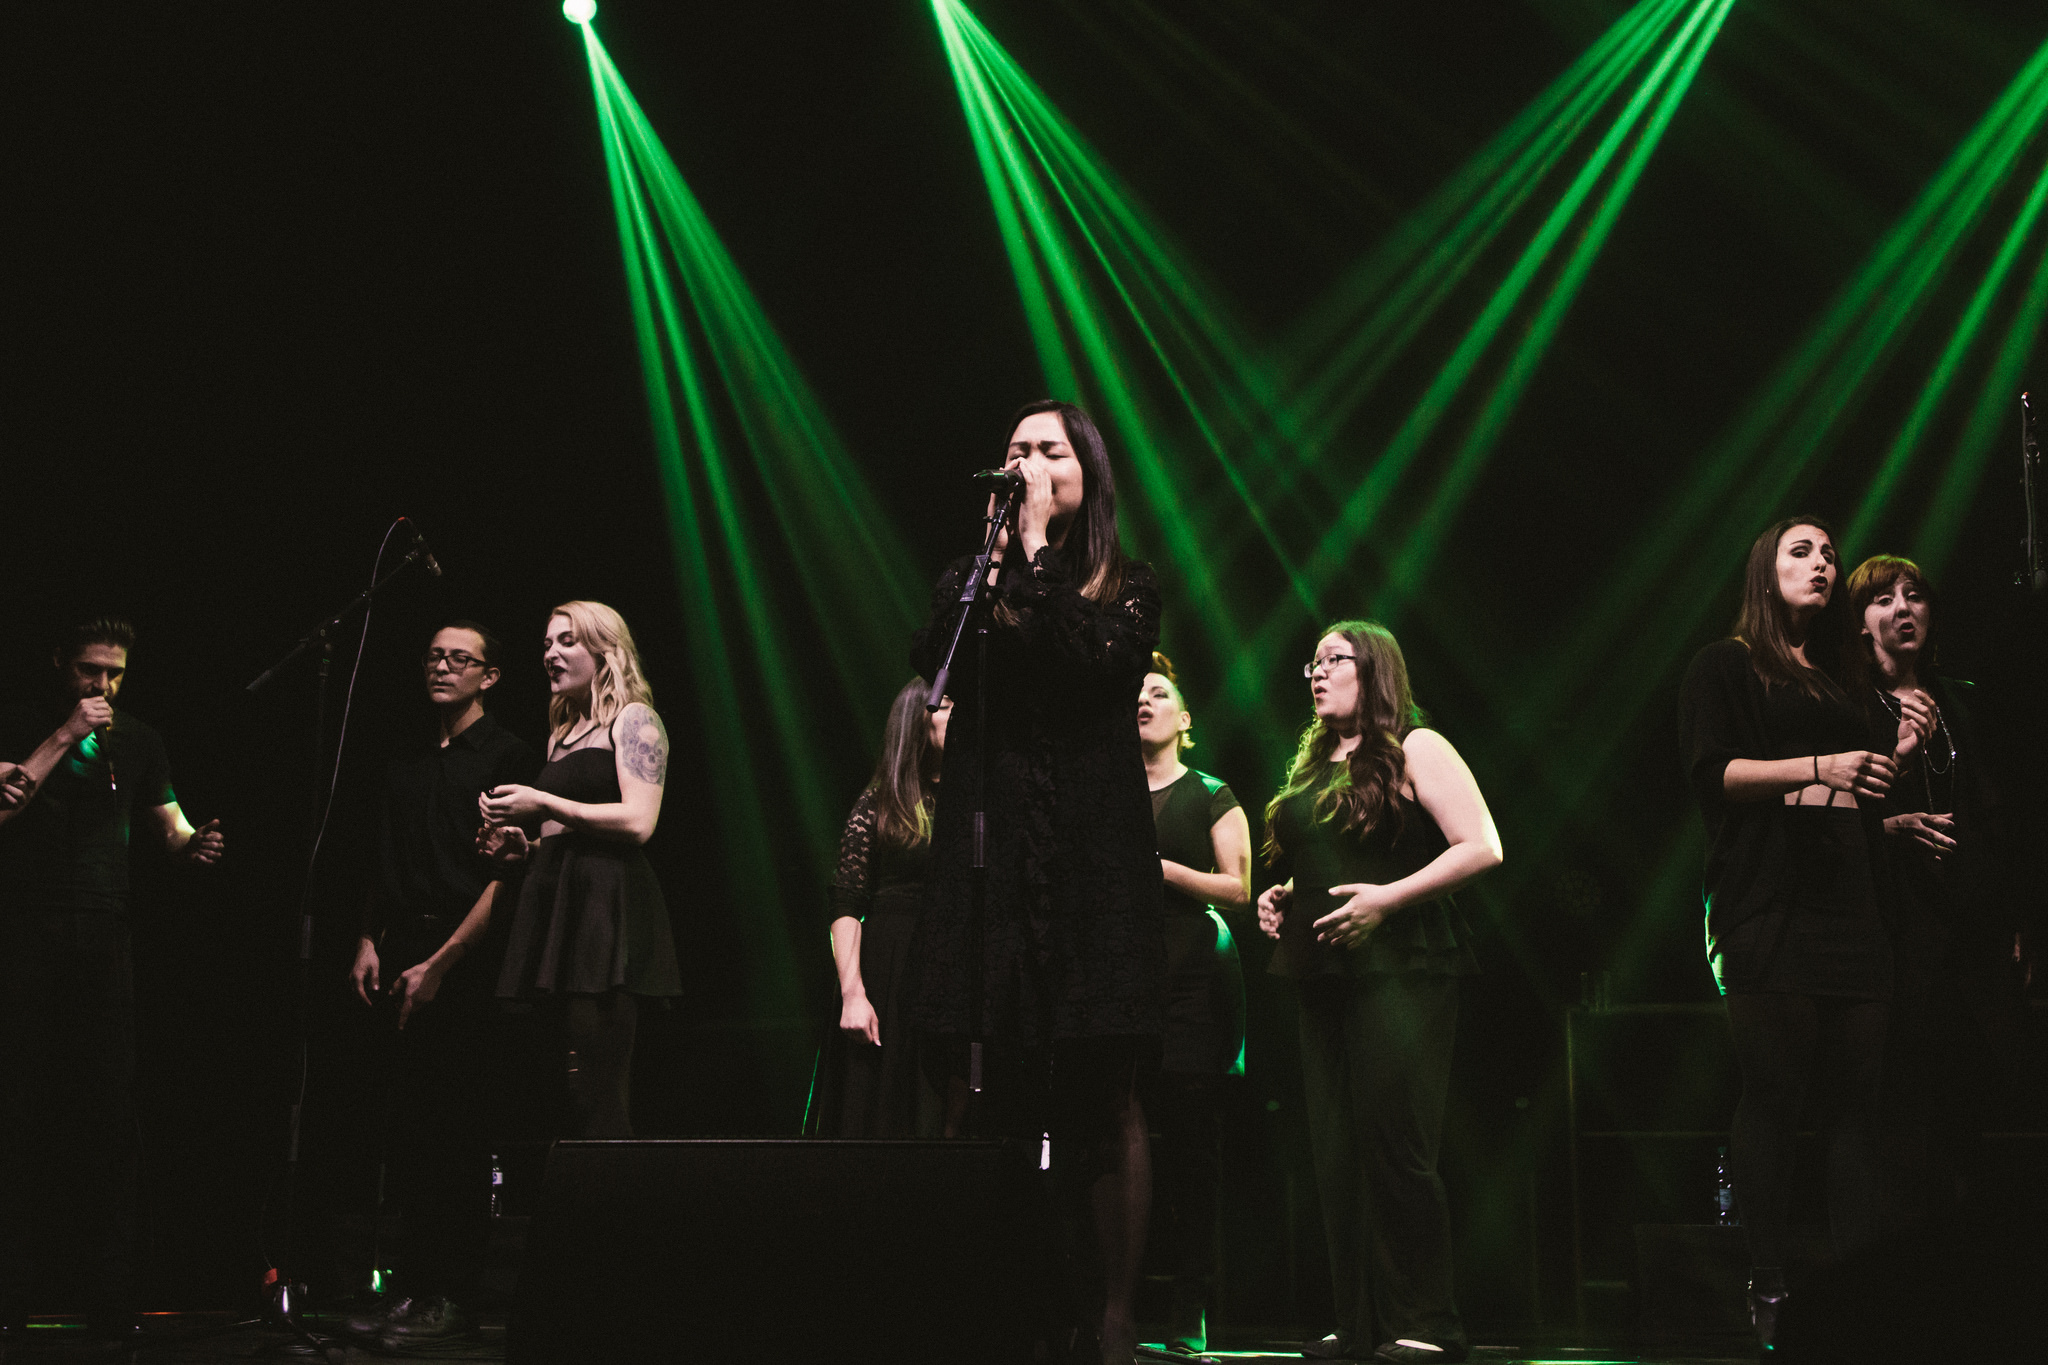  Top Shelf Vocal performs at the Belasco Theater at an event for the American Speech-Language-Hearing Foundation 